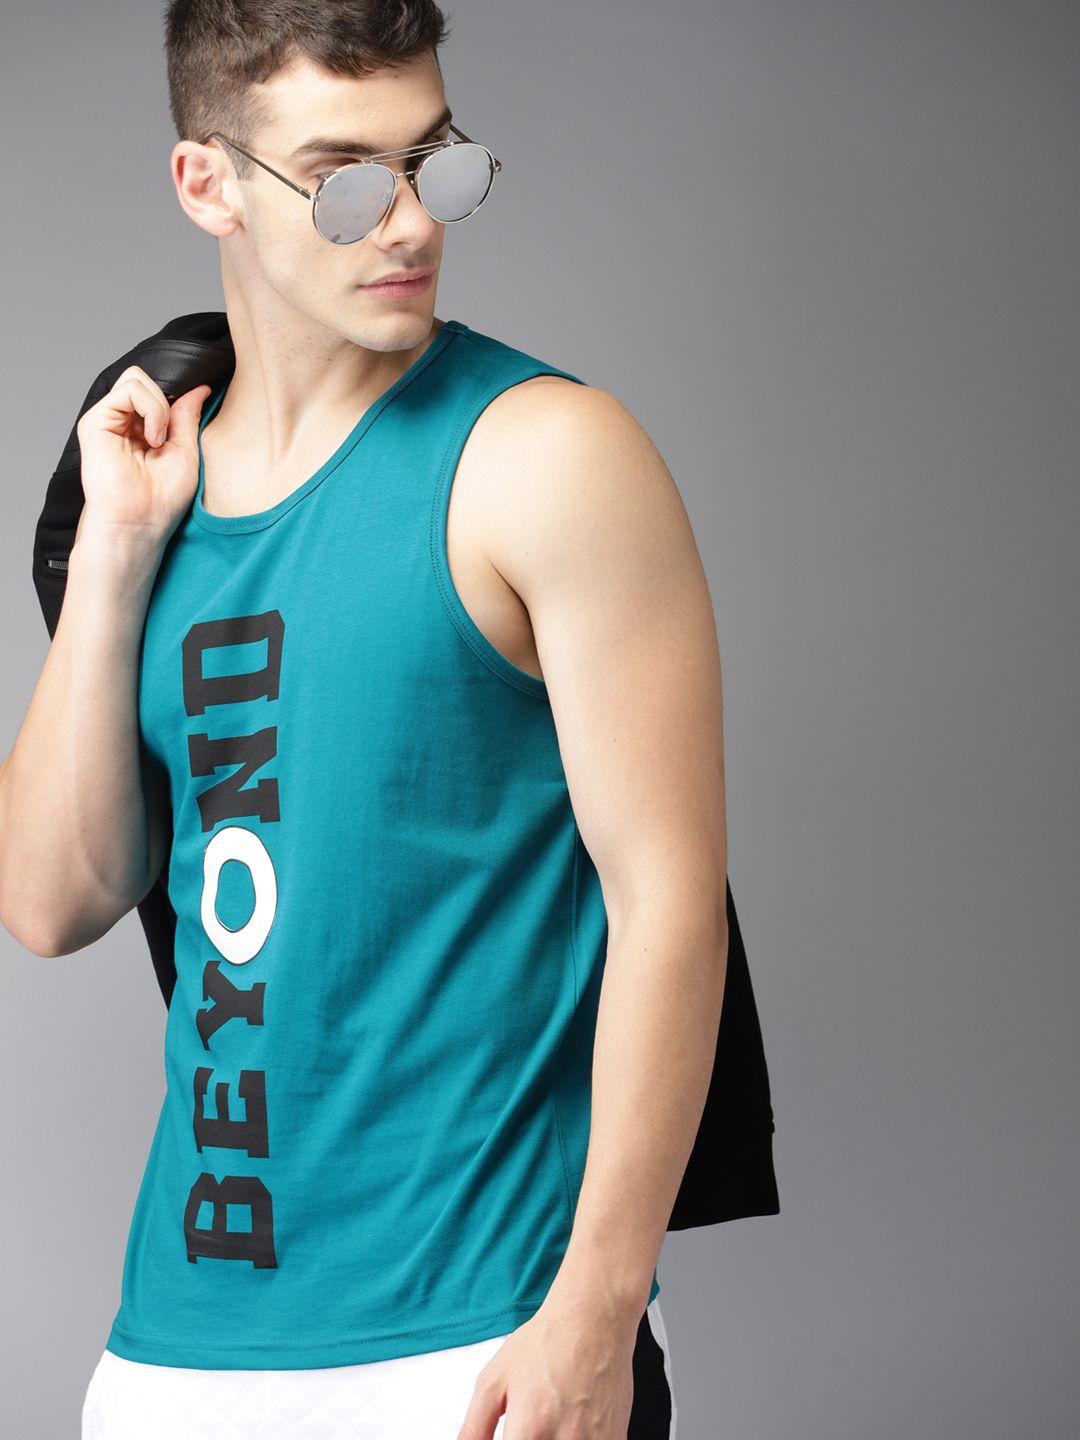 here&now men teal blue printed round neck t-shirt